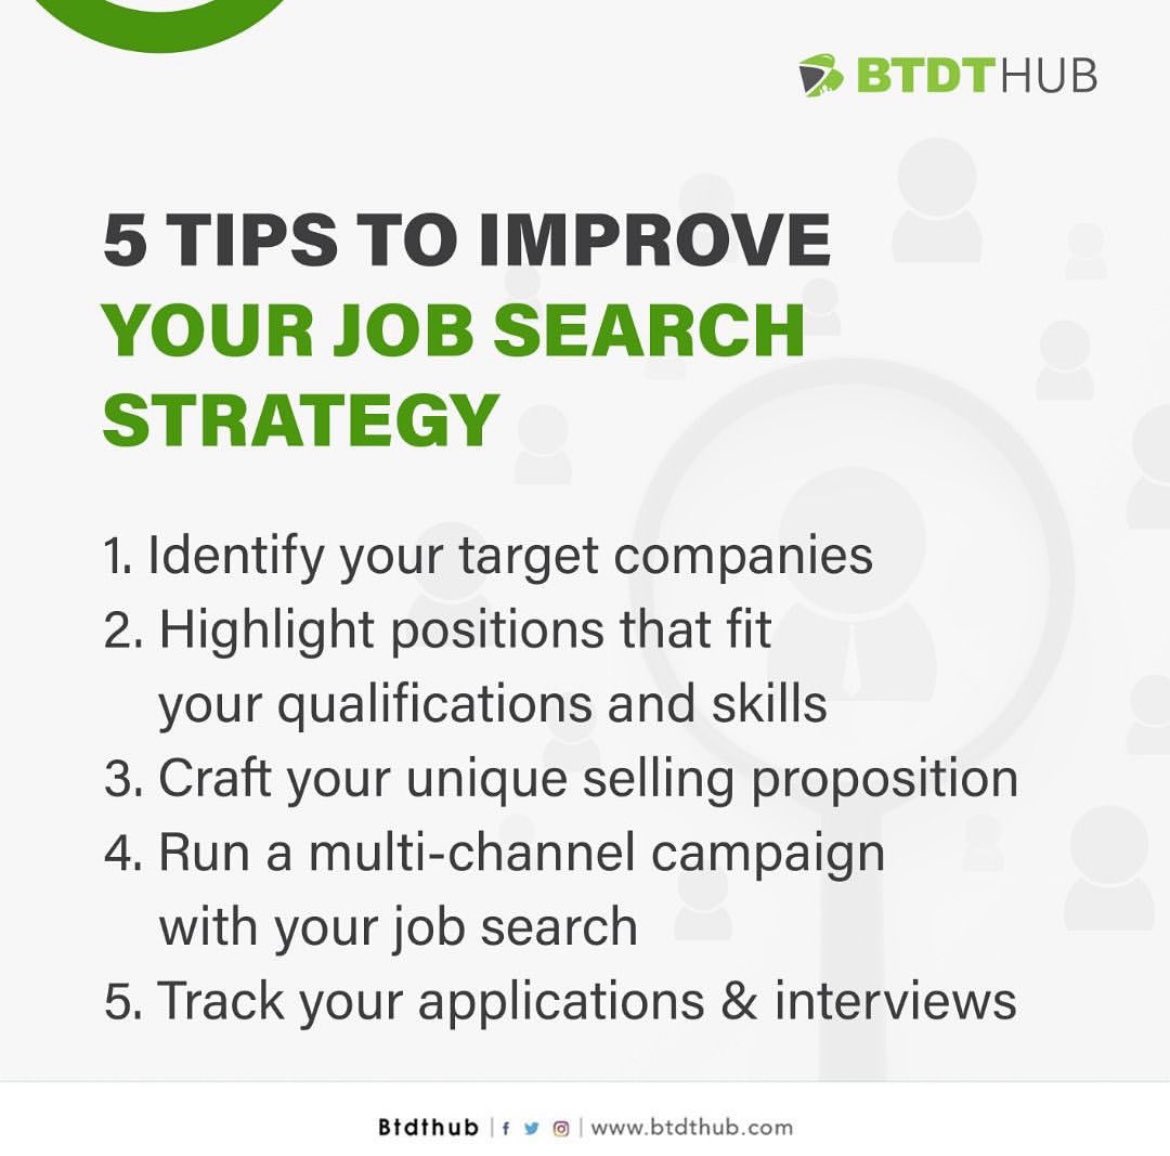 A good job search strategy will connect you with desired roles. Here are 5 tips to improve your job search strategy. Follow us for more tips to find your dream job and develop your career. #BTDTHub